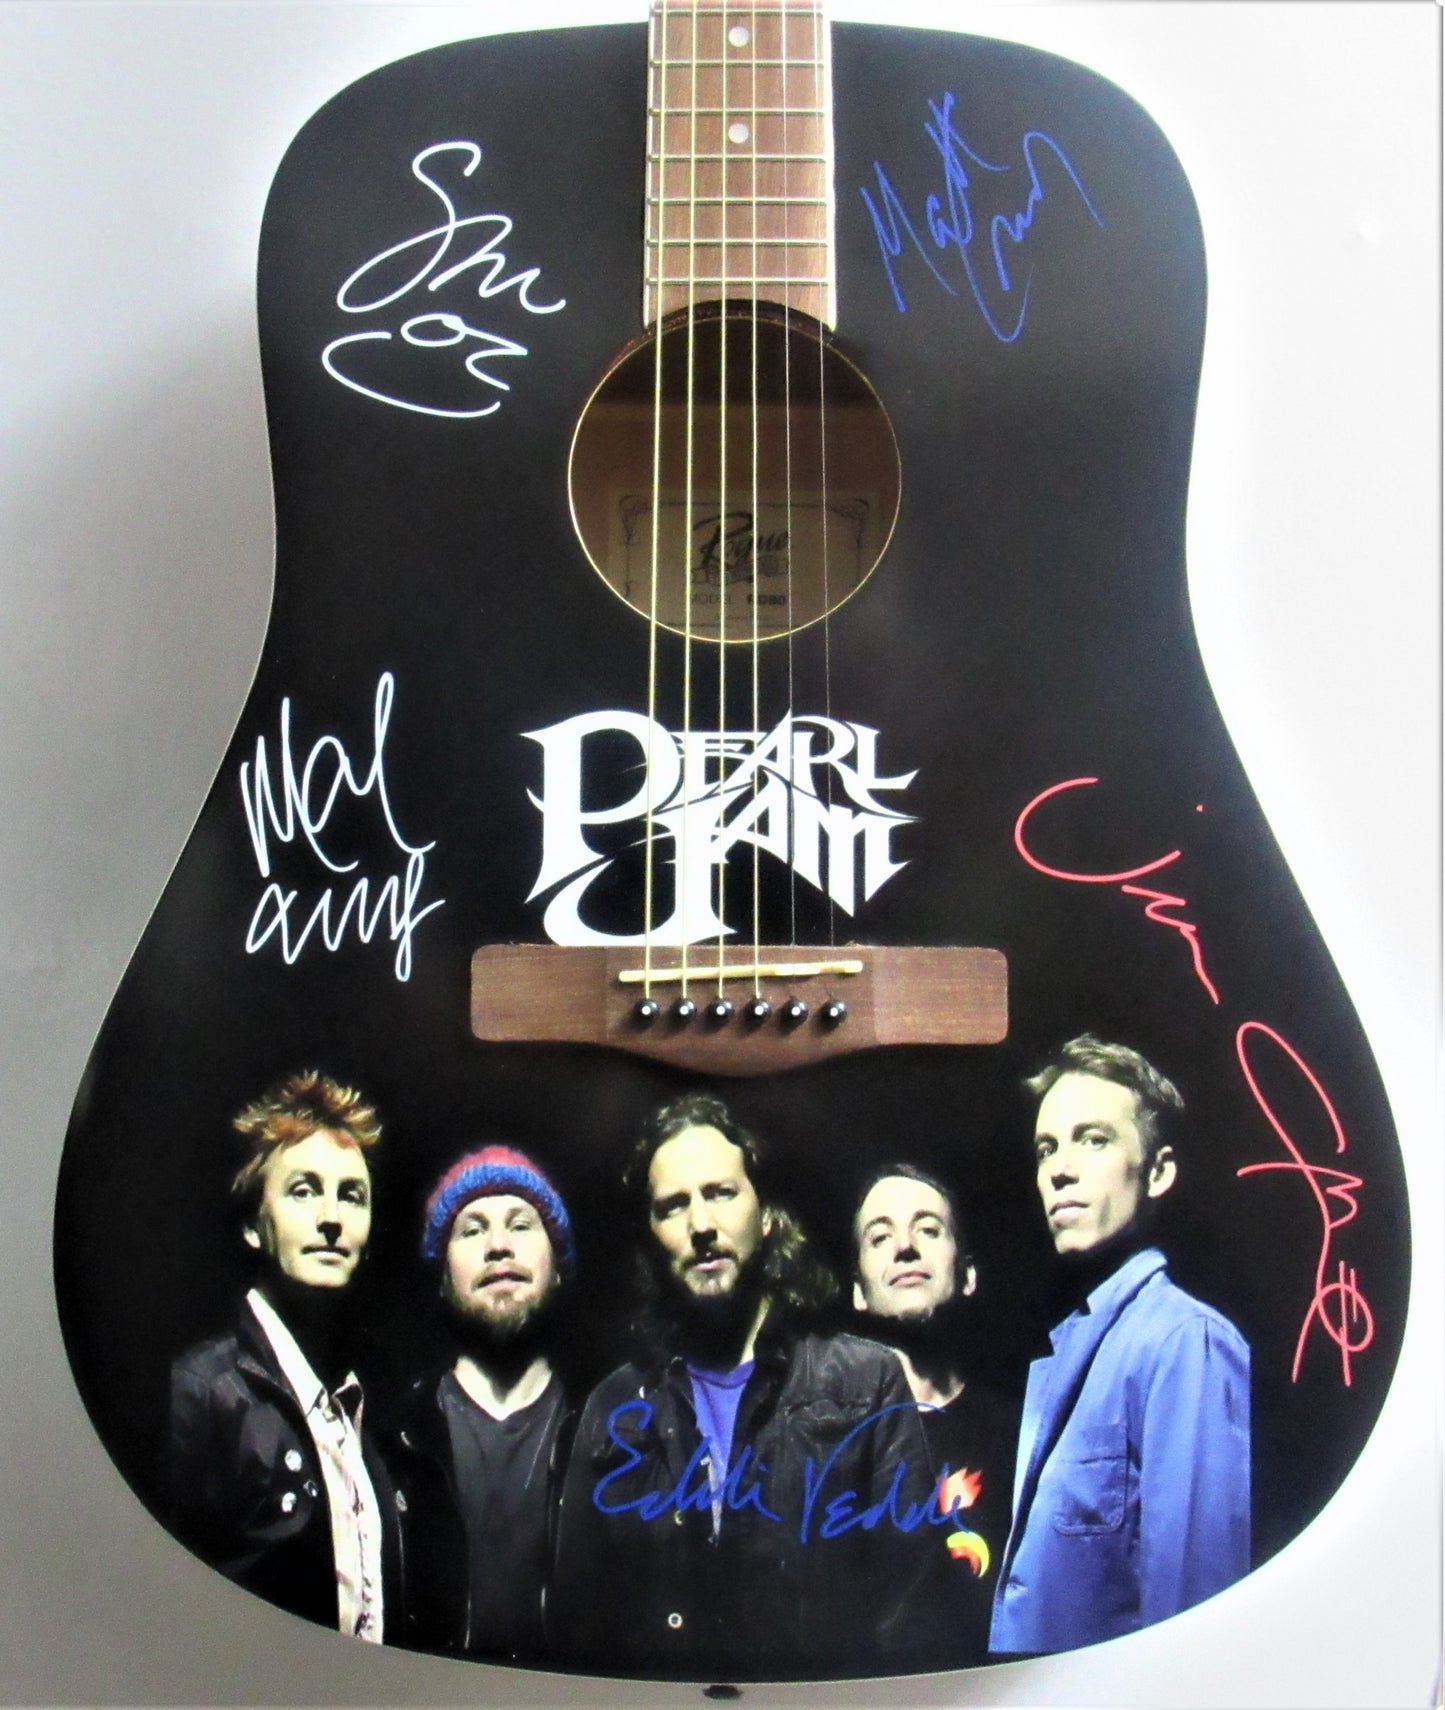 Pearl Jam Autographed Guitar - Zion Graphic Collectibles